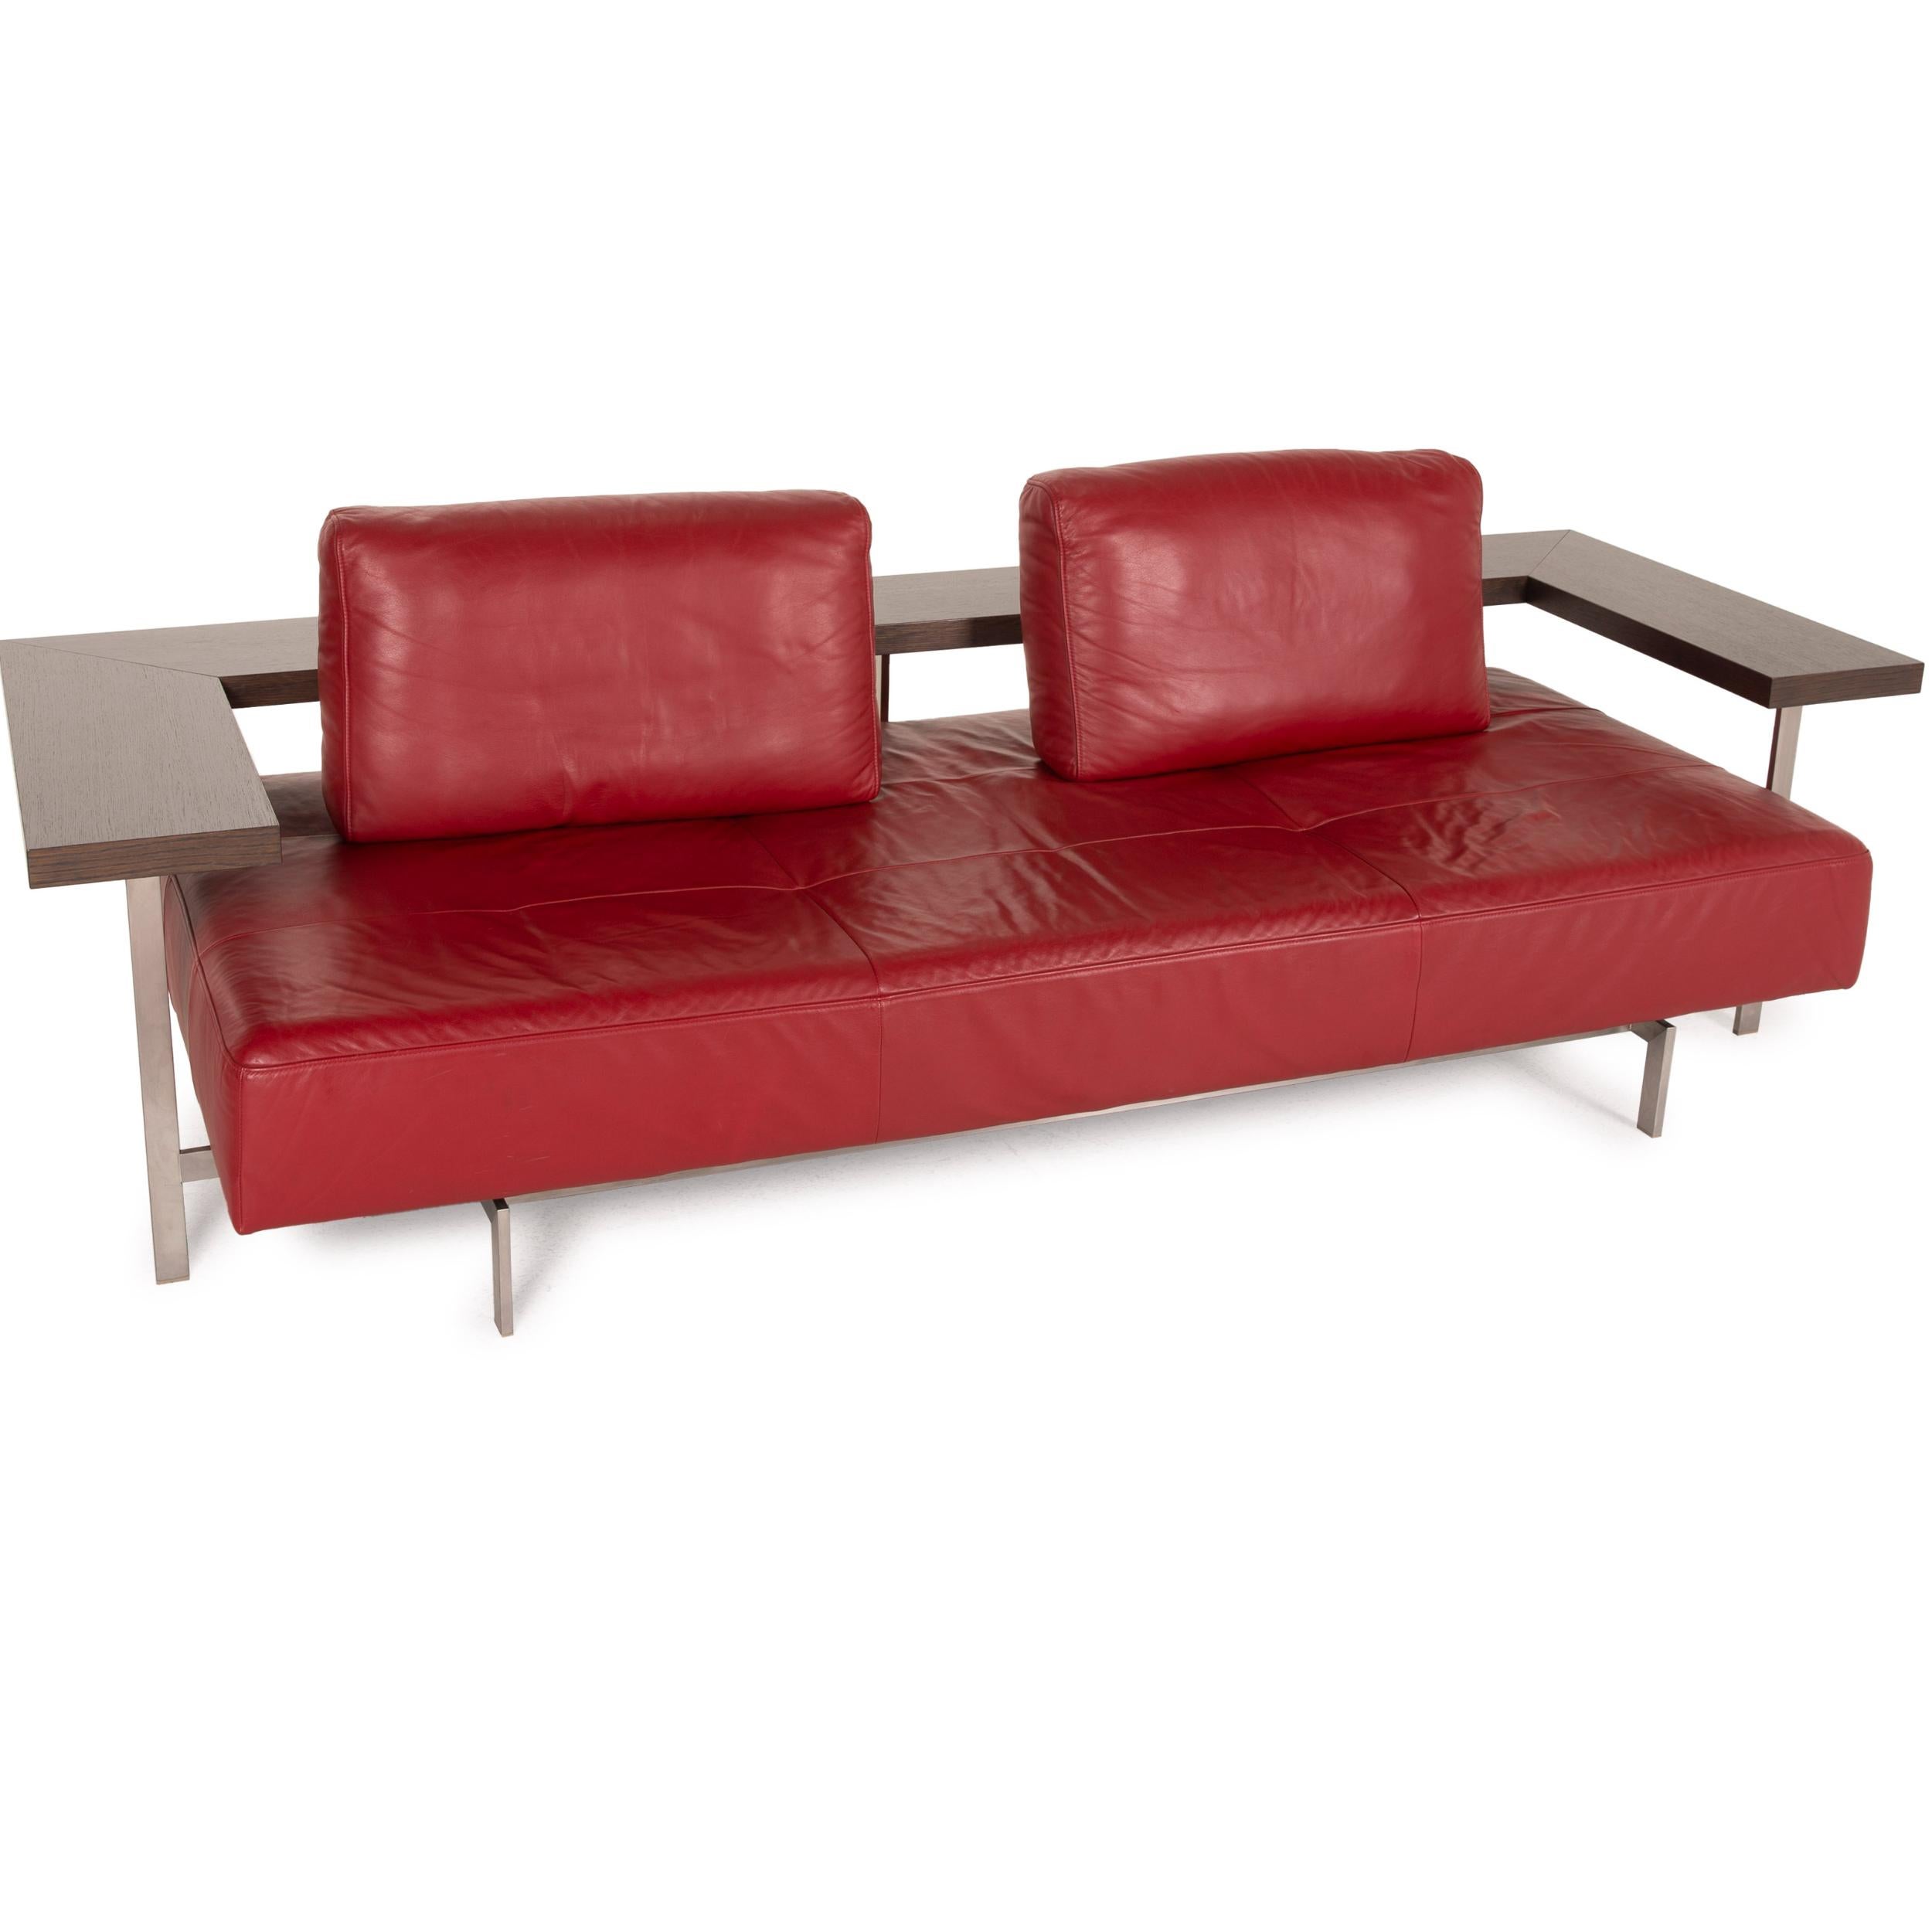 Modern Rolf Benz Dono leather sofa red two-seater couch